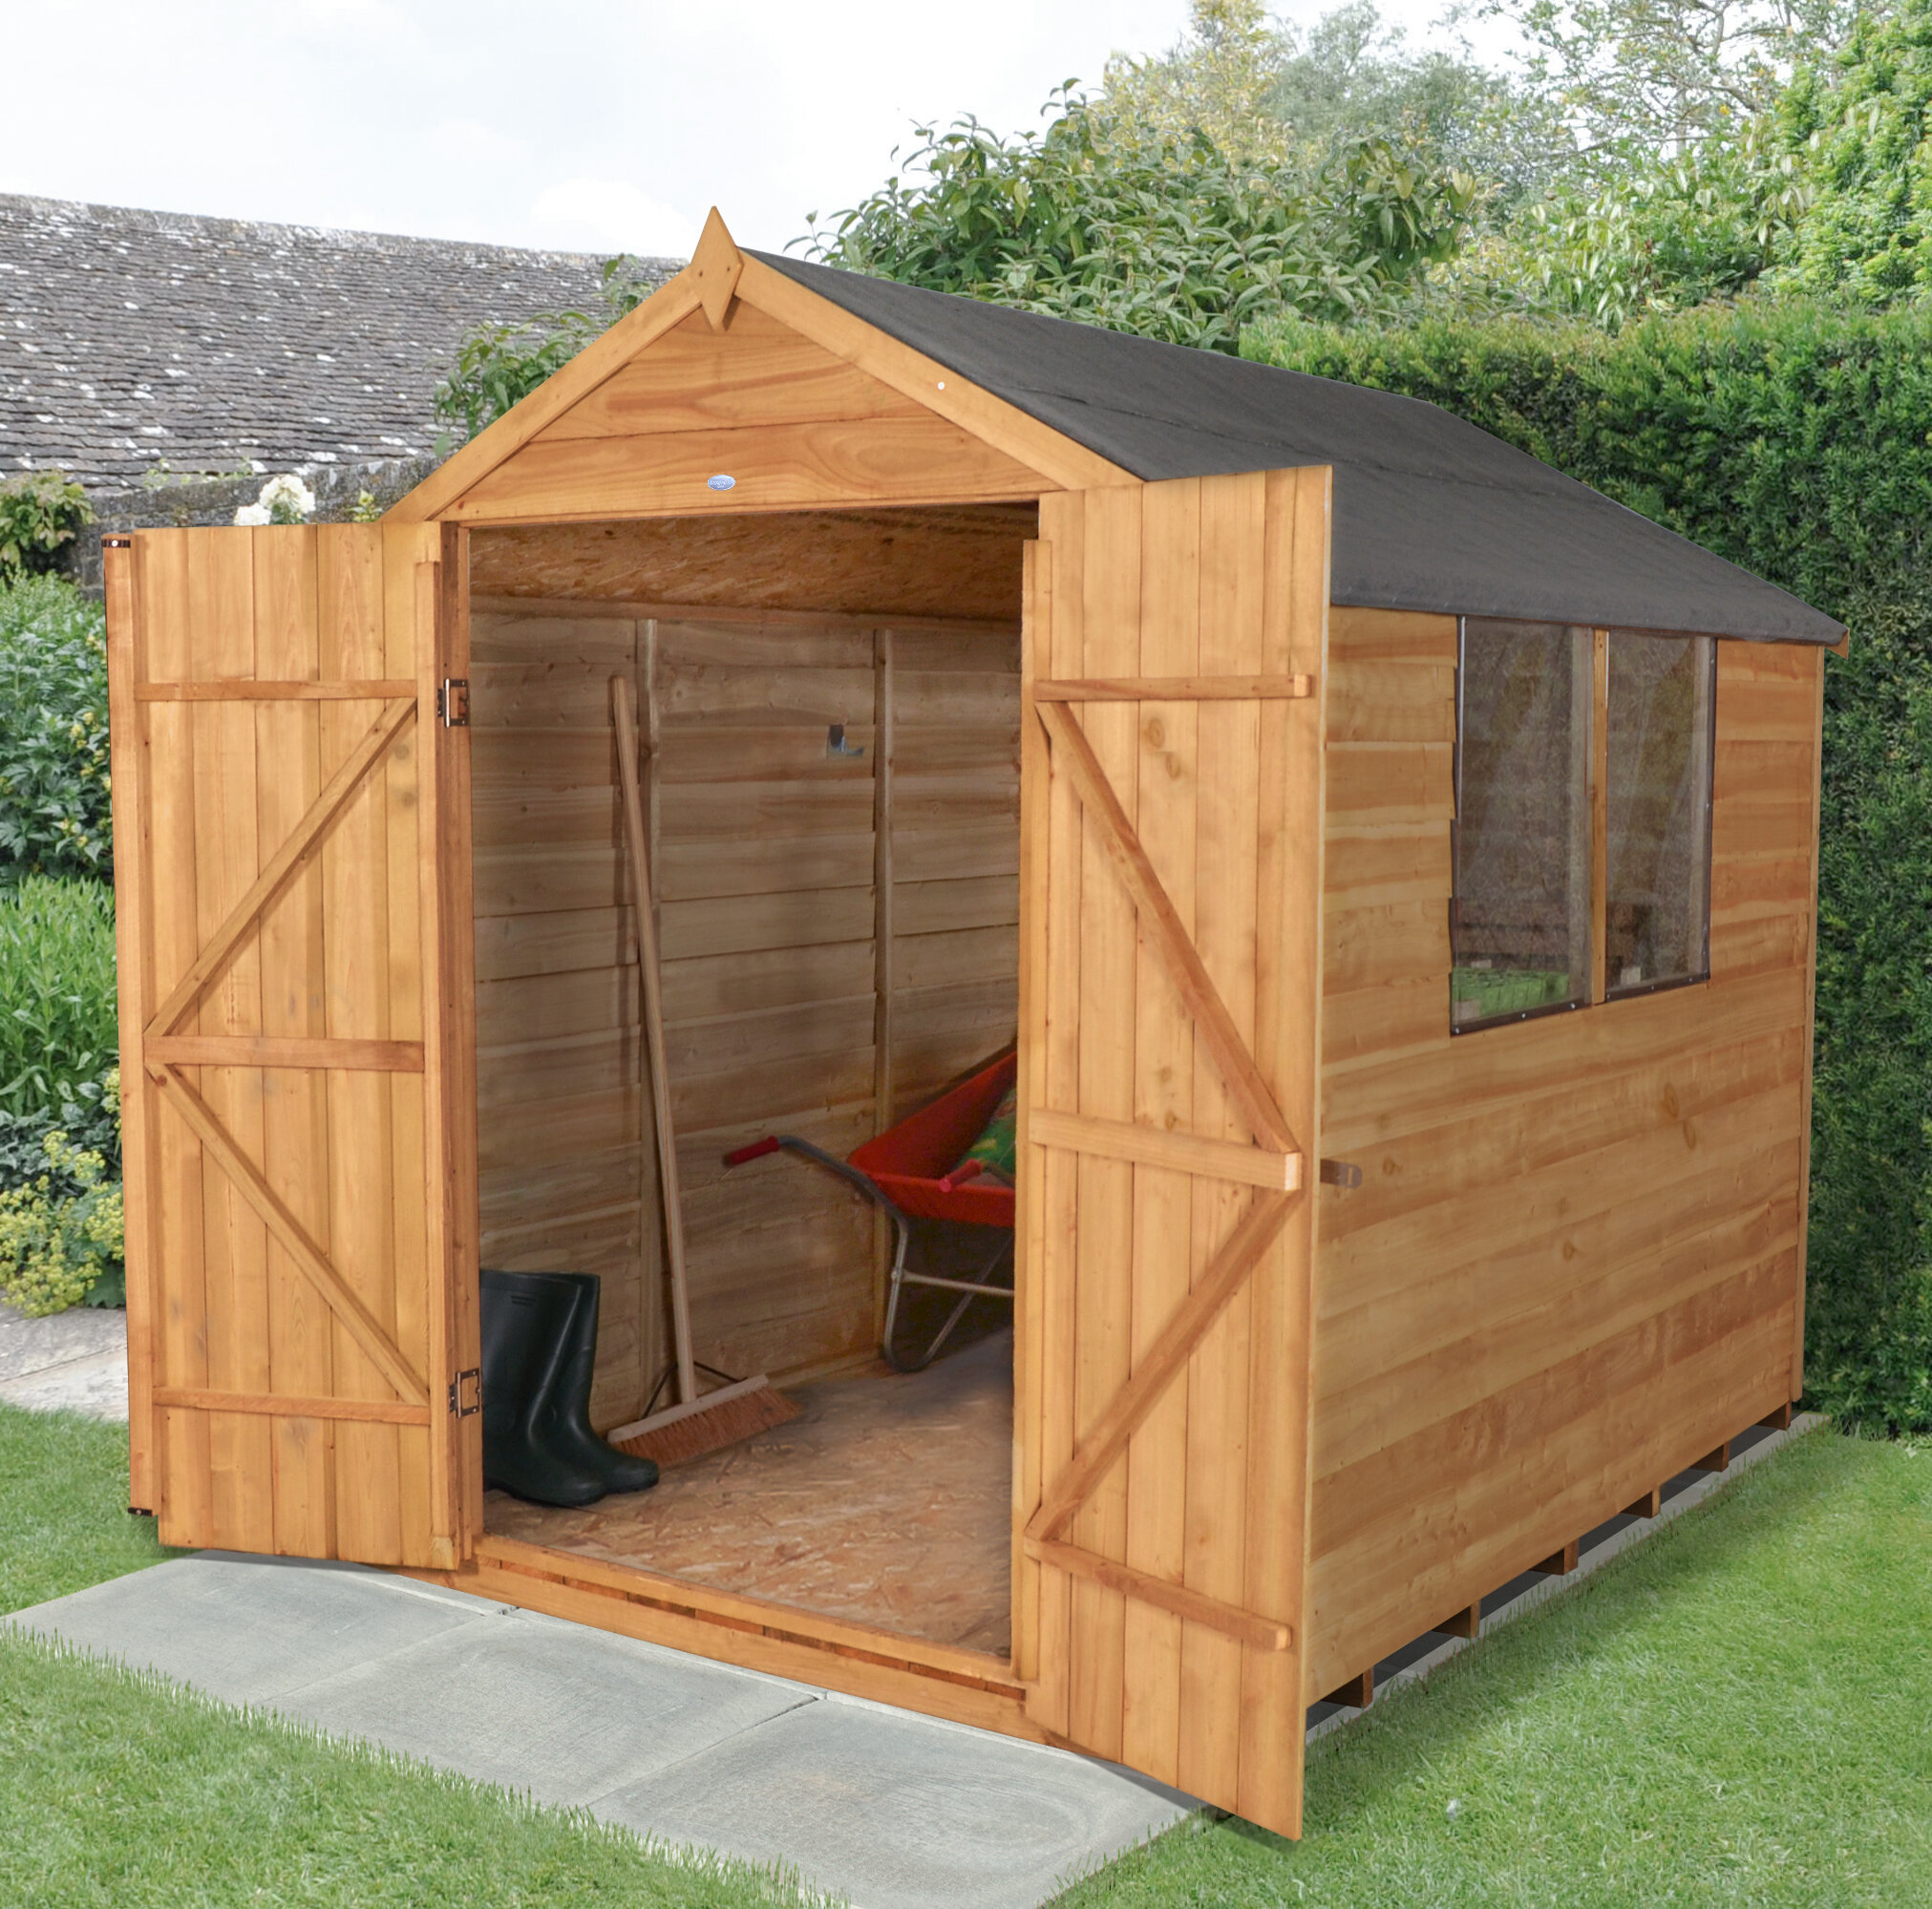 Forest Garden 6 Ft W X 8 Ft D Overlap Apex Wooden Shed Reviews